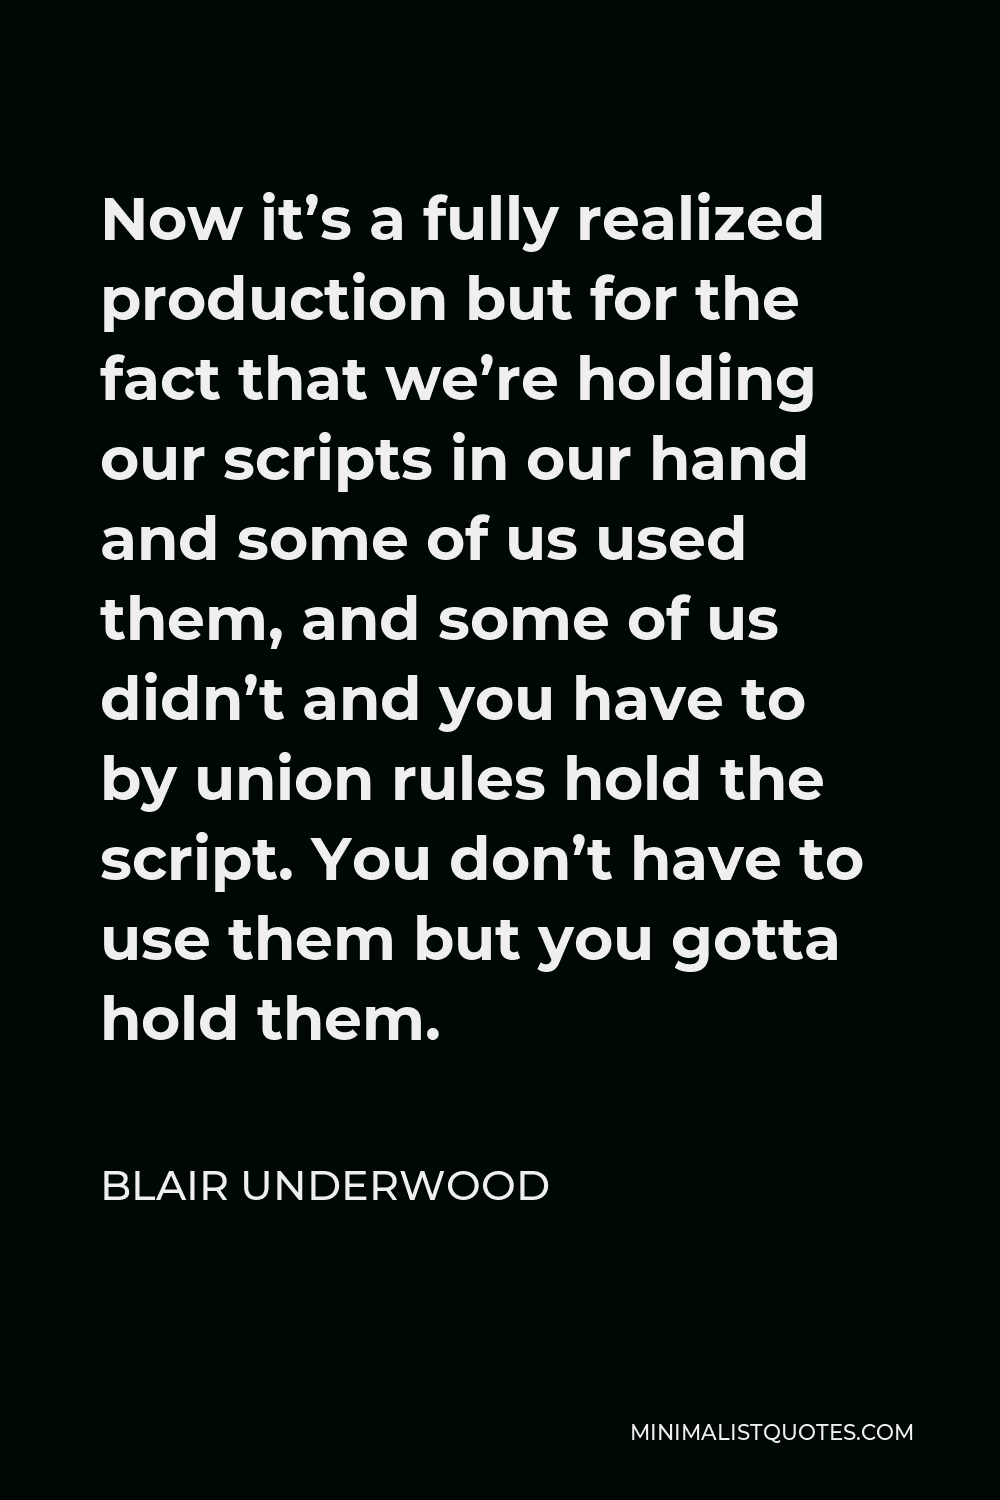 Blair Underwood Quote - Now it’s a fully realized production but for the fact that we’re holding our scripts in our hand and some of us used them, and some of us didn’t and you have to by union rules hold the script. You don’t have to use them but you gotta hold them.